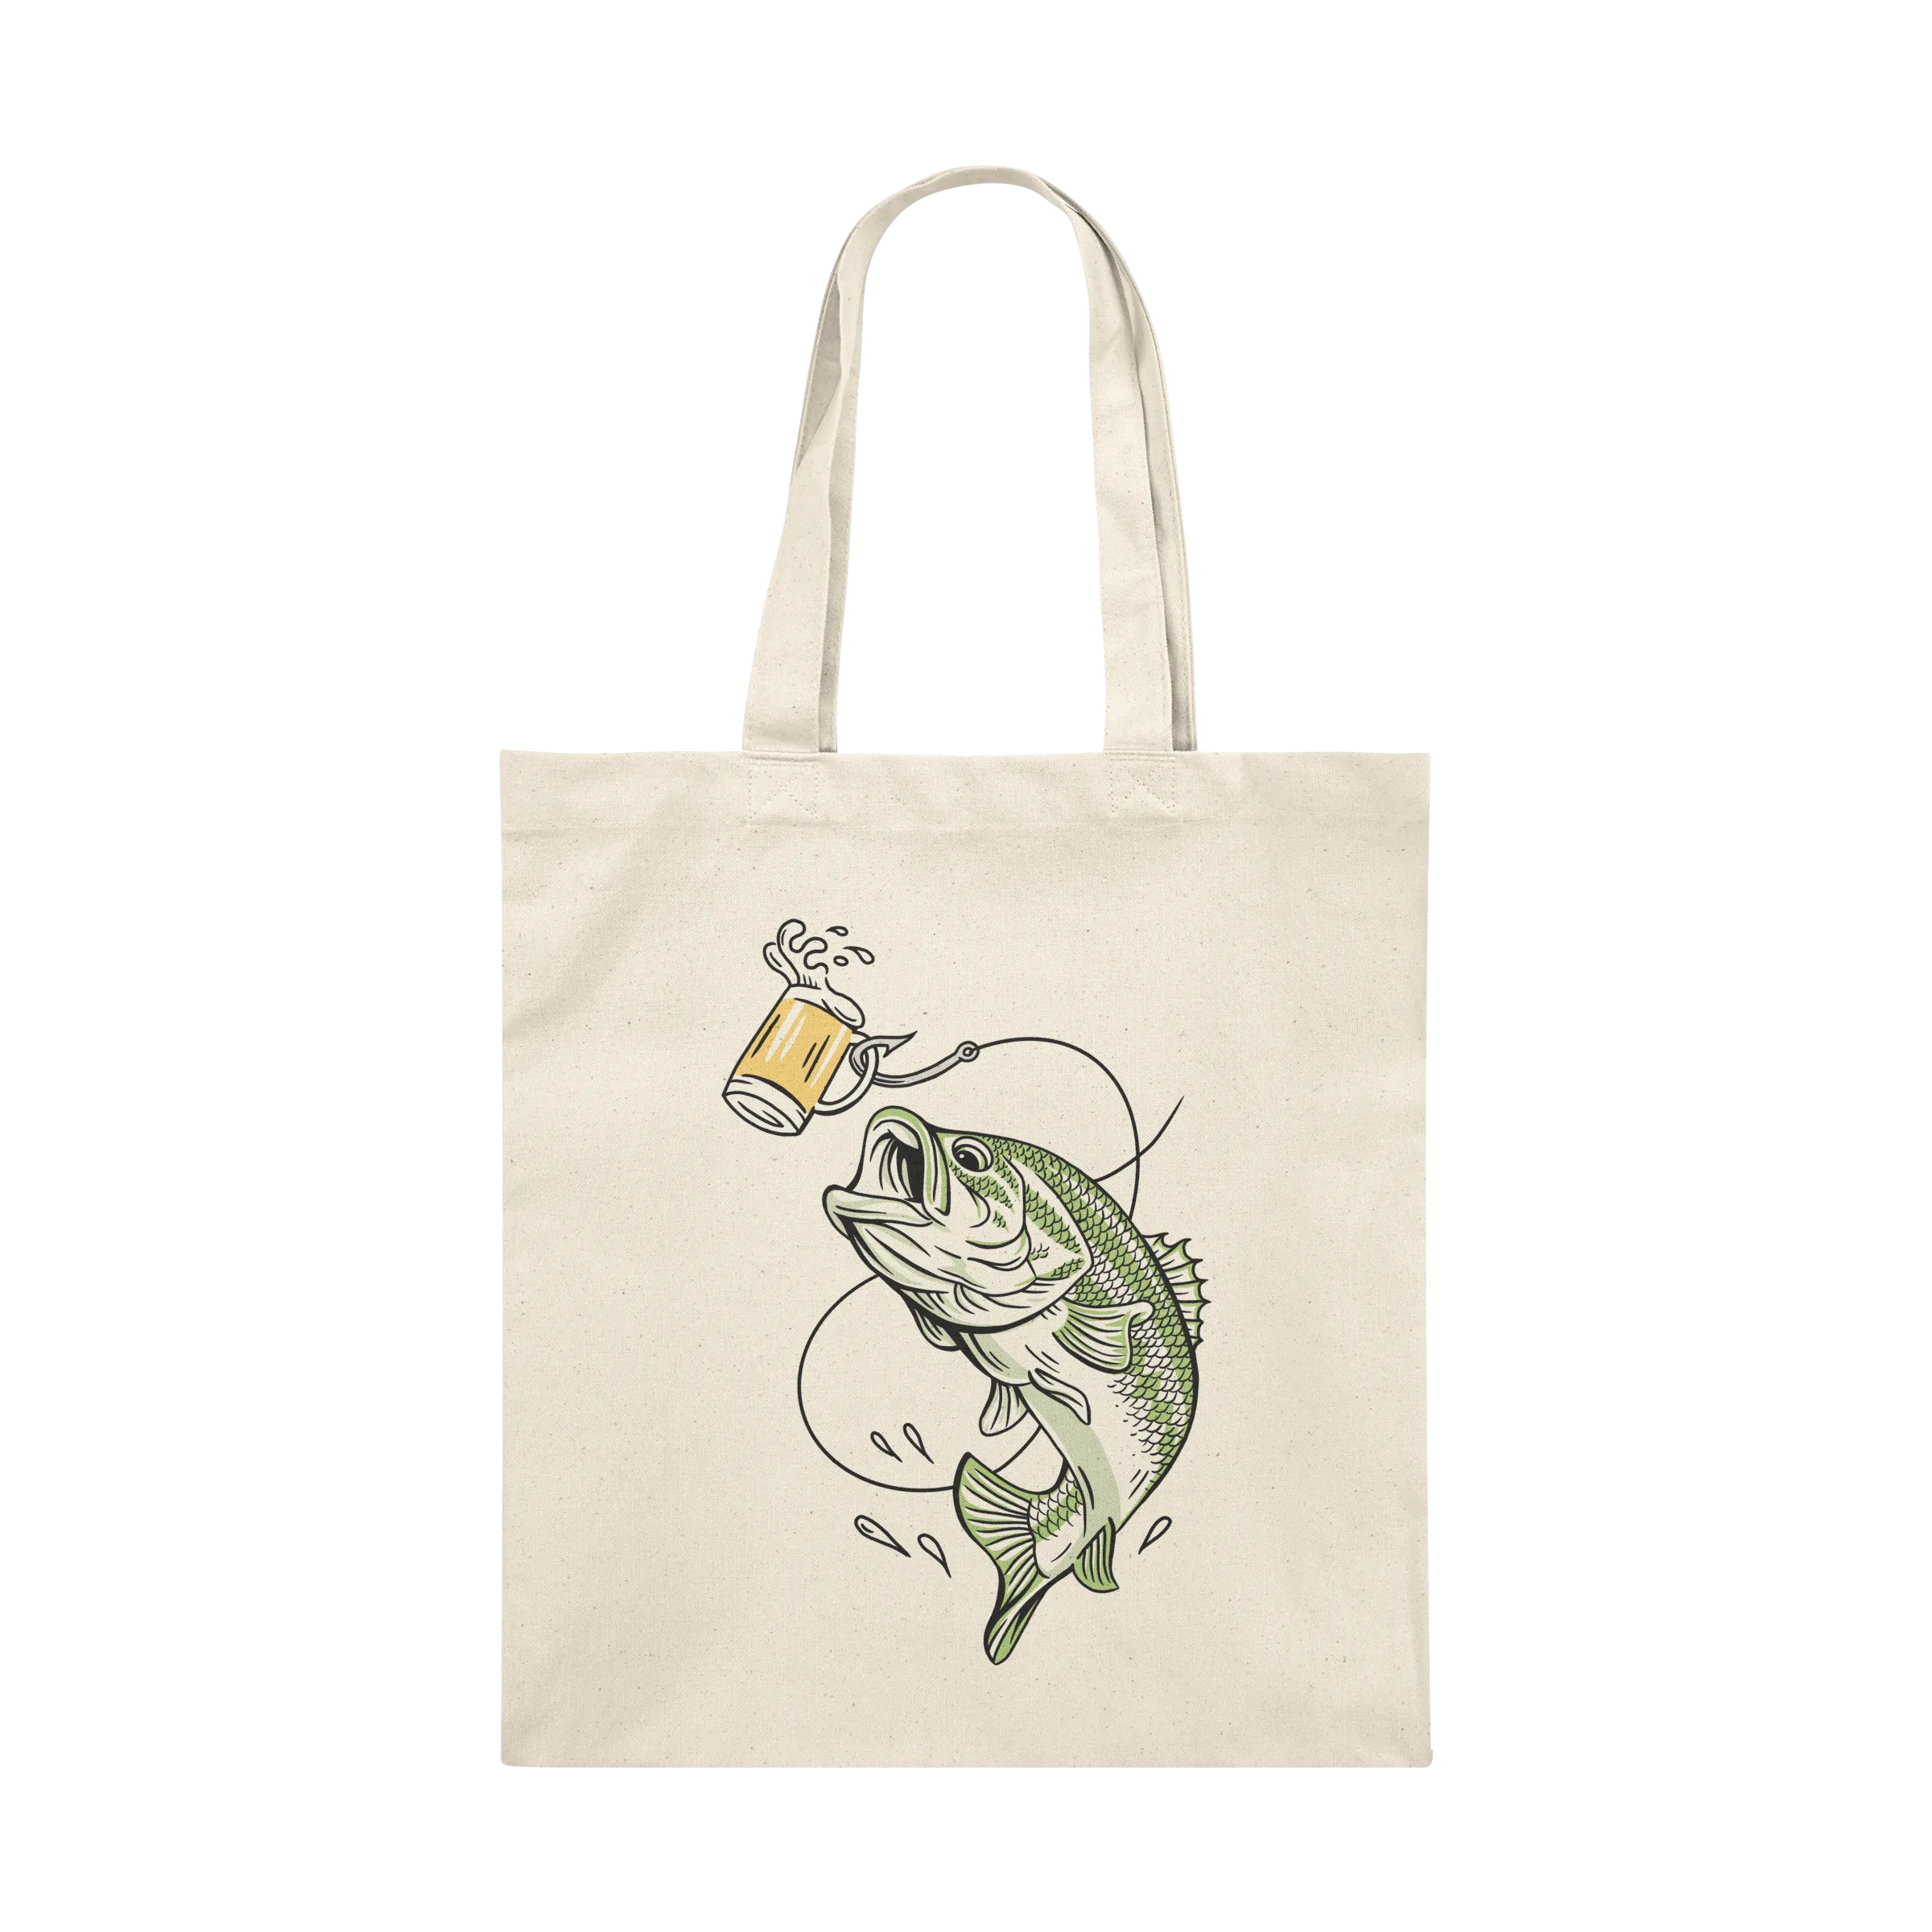 Lager Lure Bass Beer” graphic canvas tote by Habby Art.